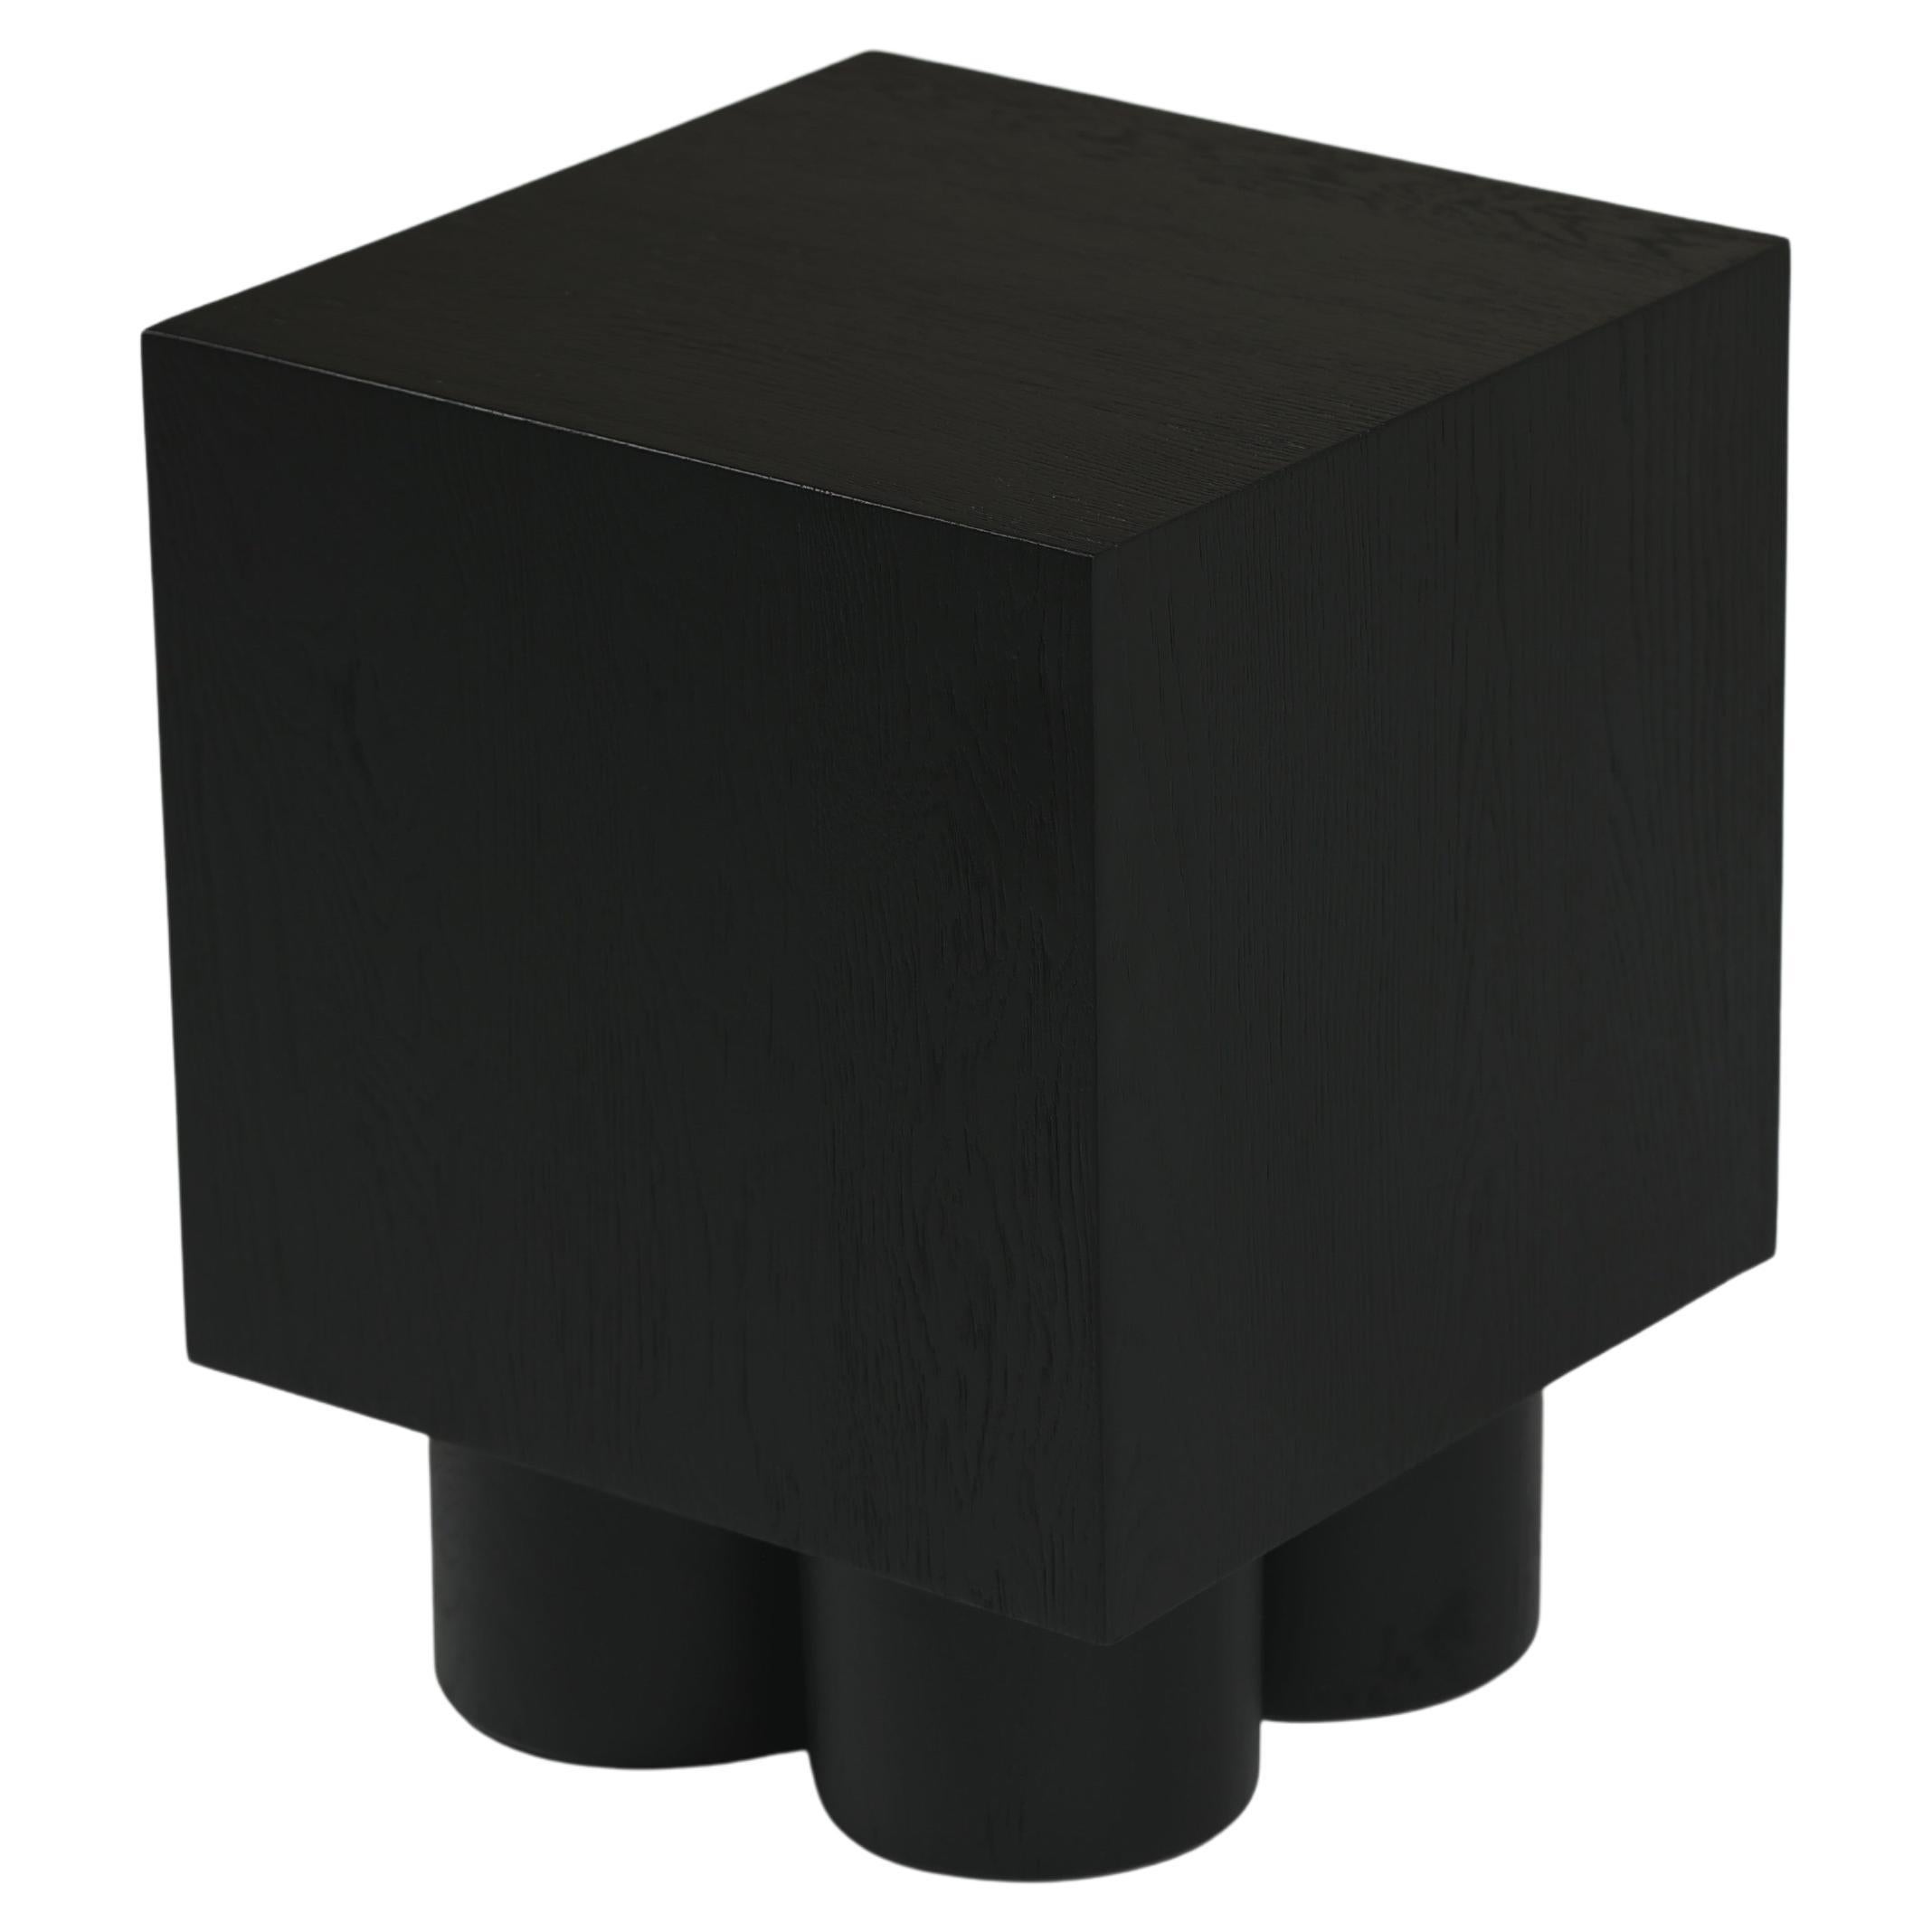 Kimi Side Table/Stool from the Oak Saga Collection by Arbore For Sale